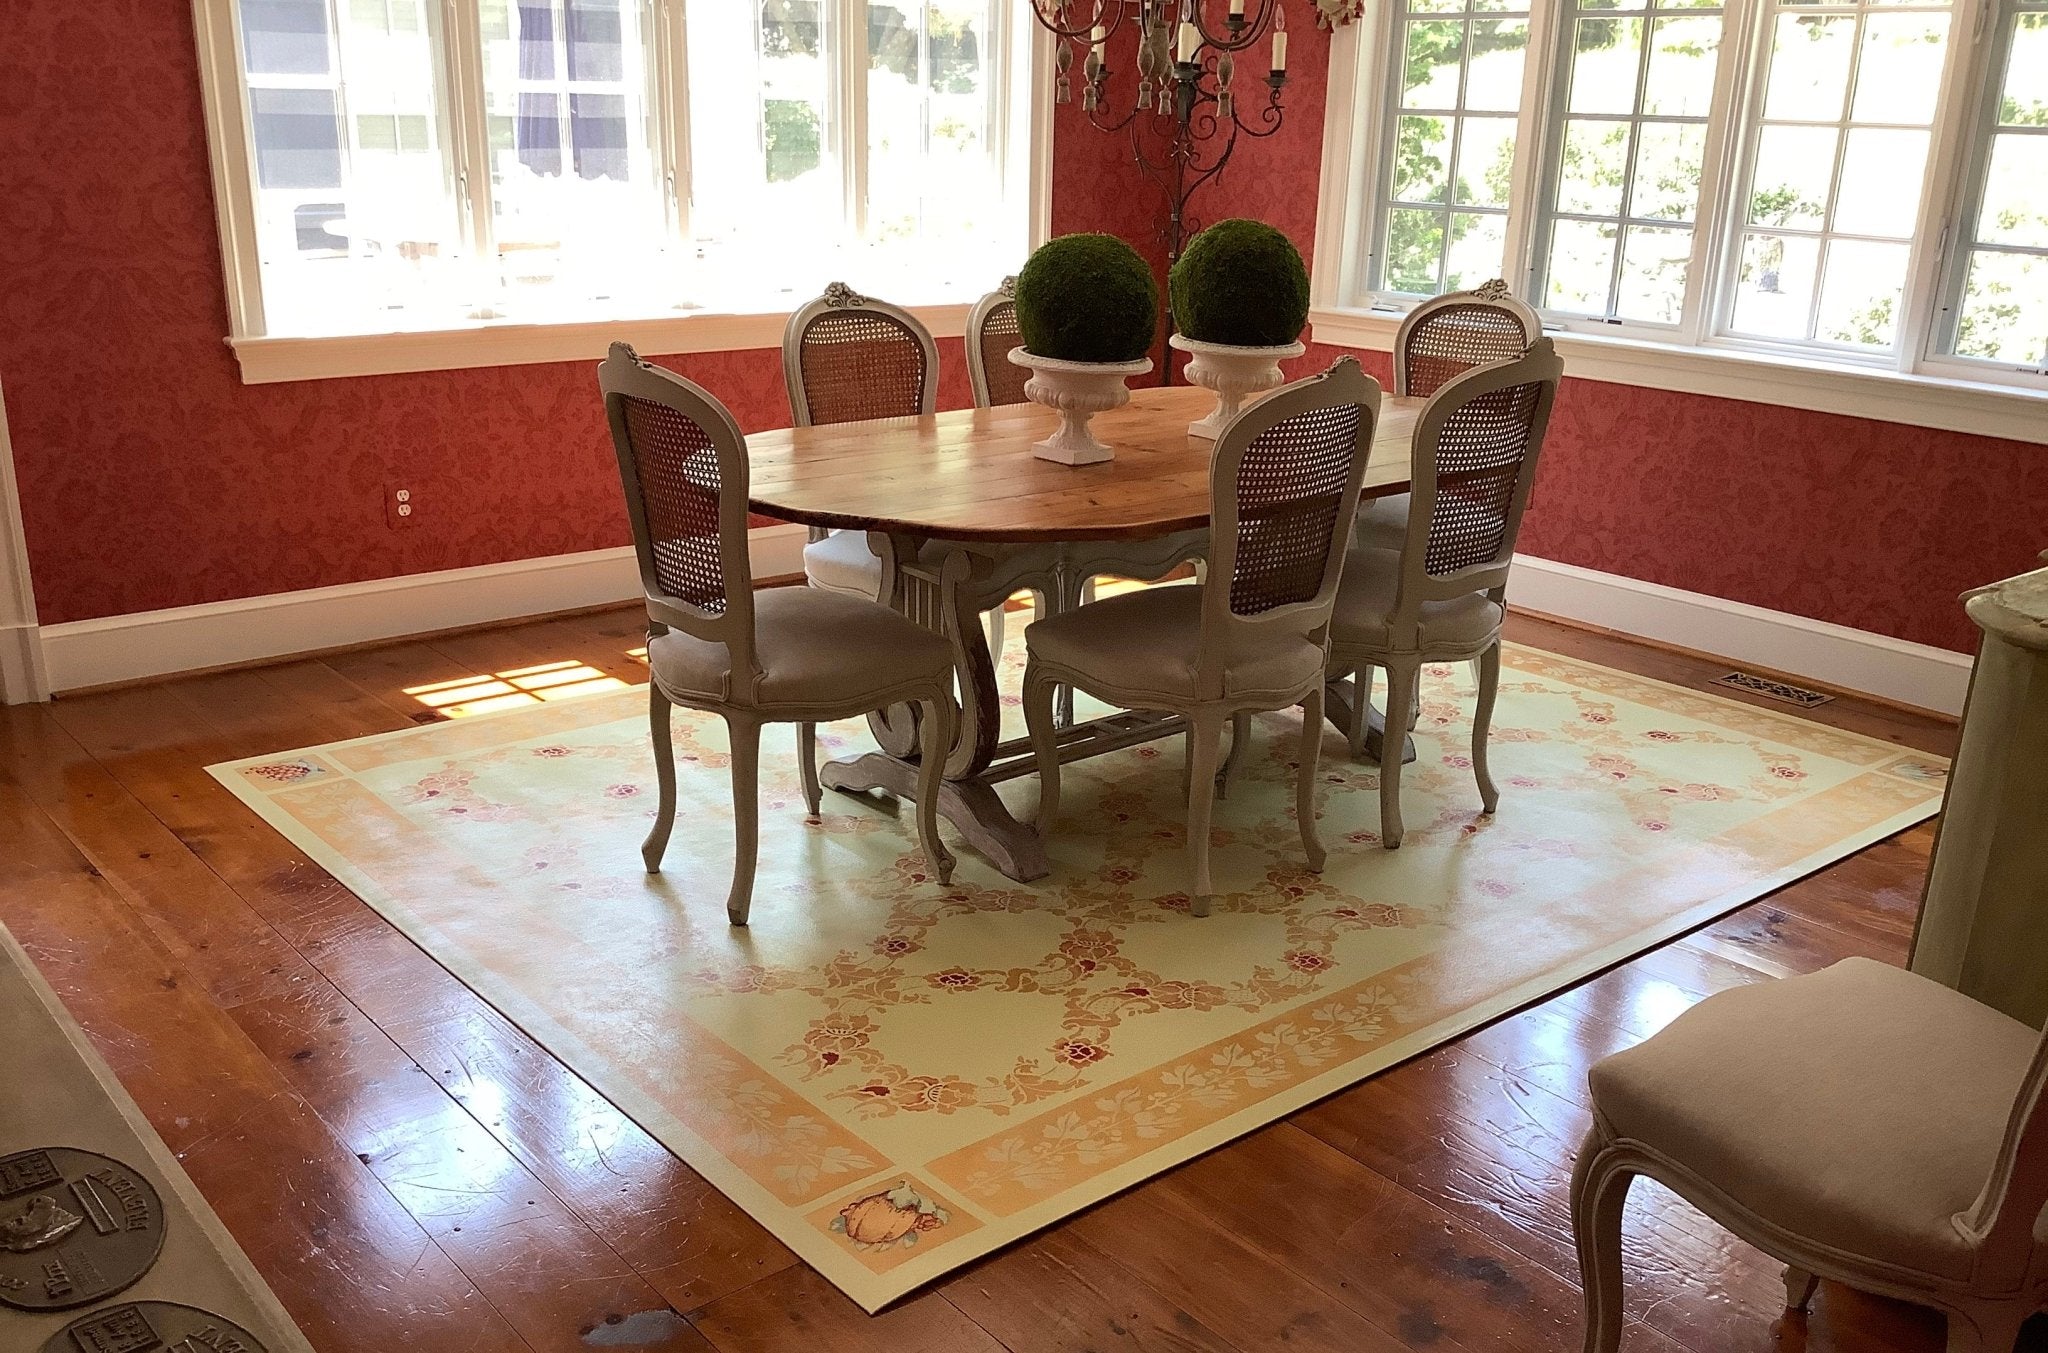 In-situ image of this custom floorcloth with a trellis-like center and border vines.